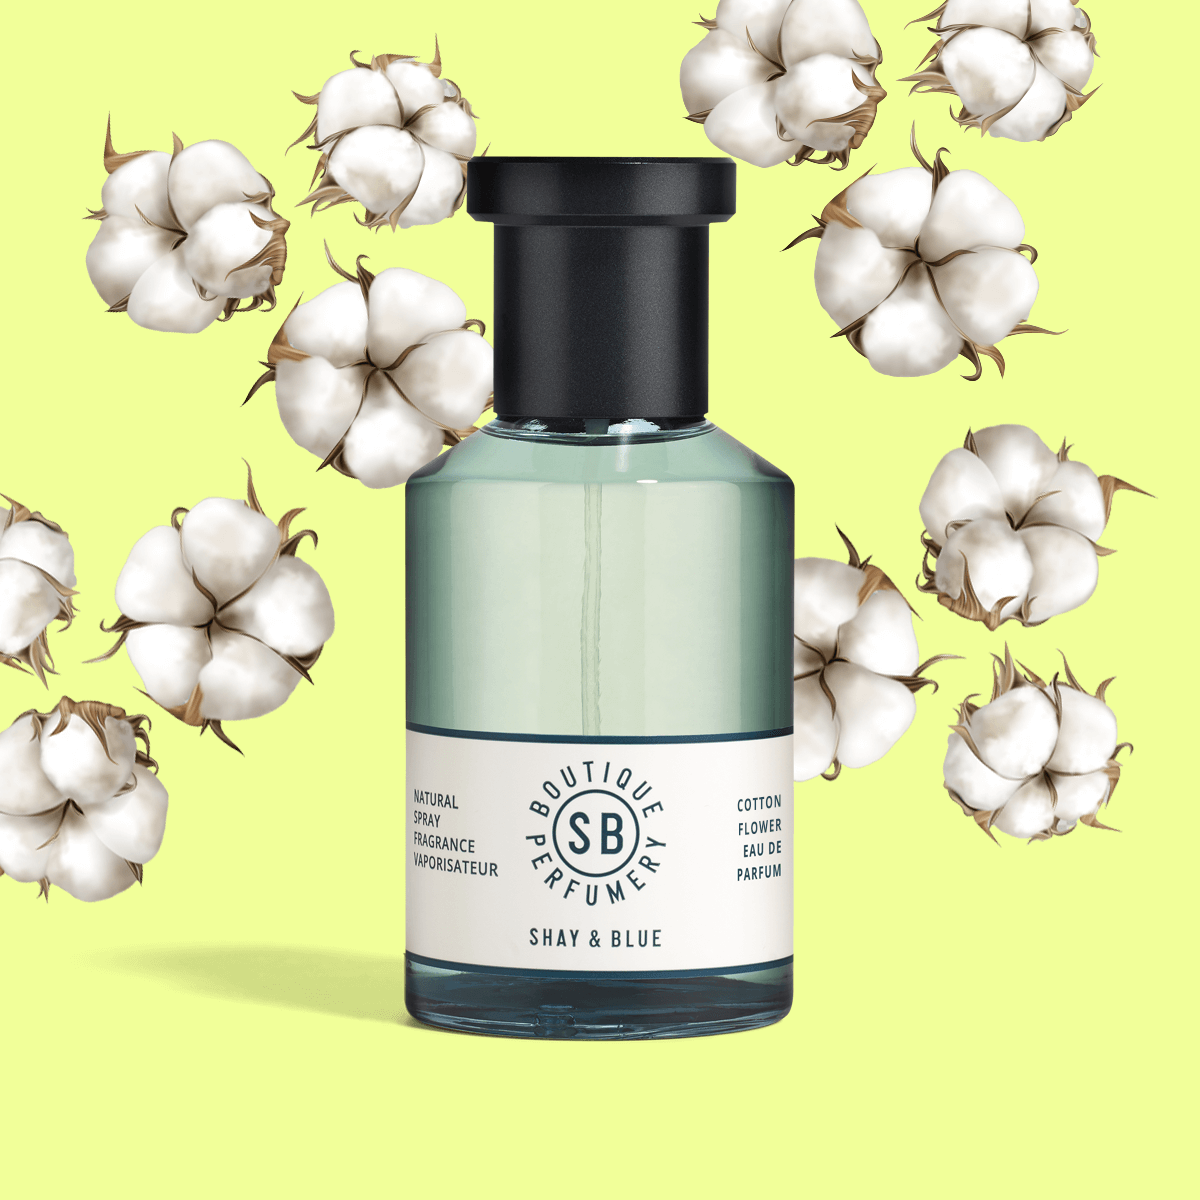 Cotton Flower Limited Edition Fragrance 100ml | Cotton Flower gives free spirited freshness and escapism. Confident Iris breaks from conformity and is soothed with soft Cashmere Woods. | Clean All Gender Fragrance | Shay & Blue